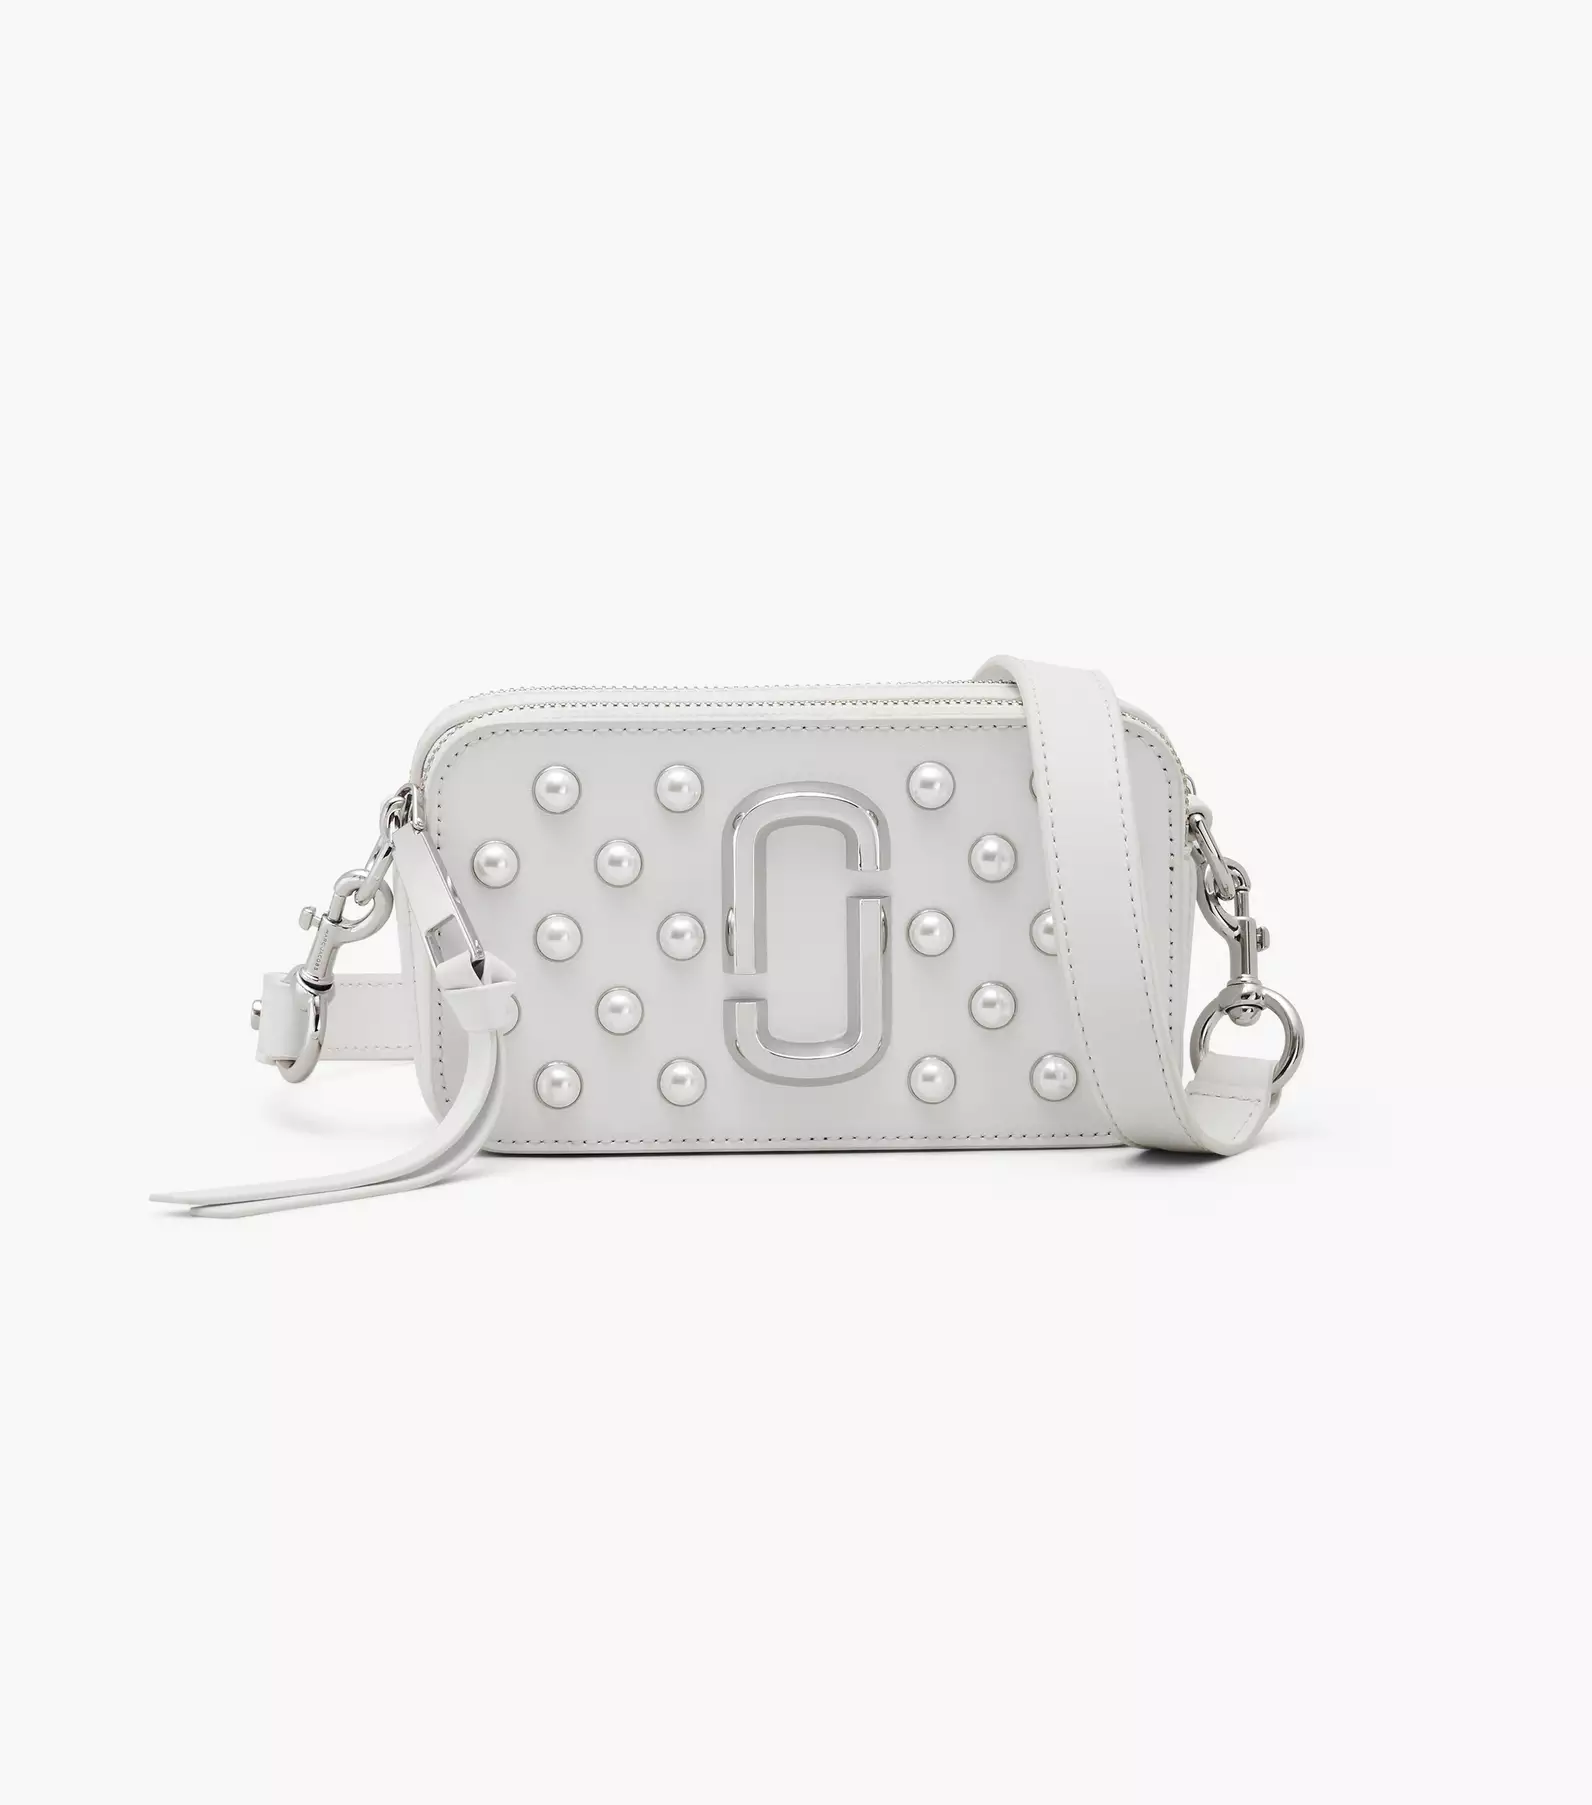 THE ICONIC - THE MARC JACOBS Snapshot DTM Cross Body Bag > https